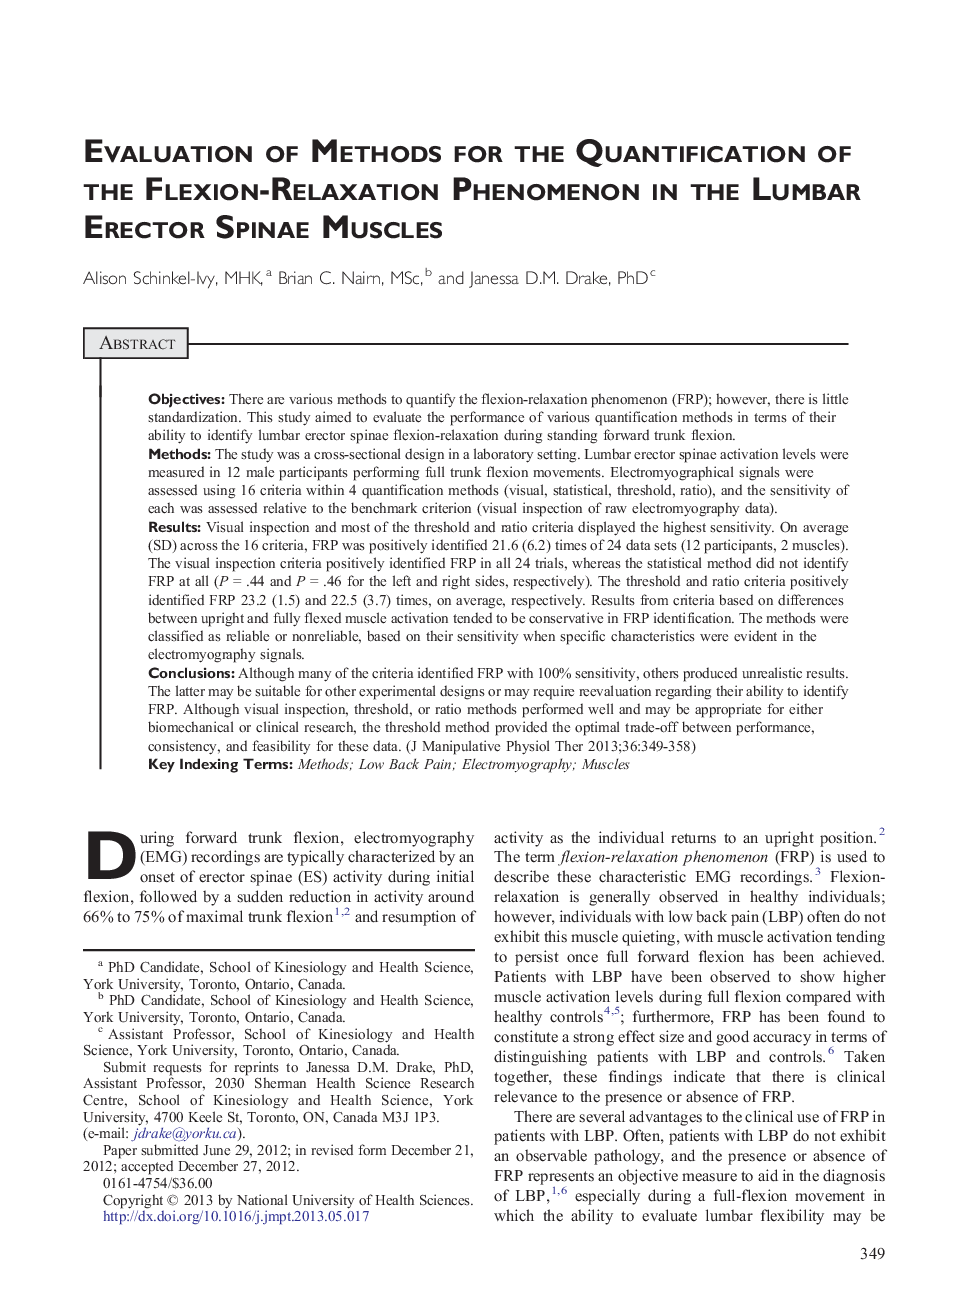 Evaluation of Methods for the Quantification of the Flexion-Relaxation Phenomenon in the Lumbar Erector Spinae Muscles